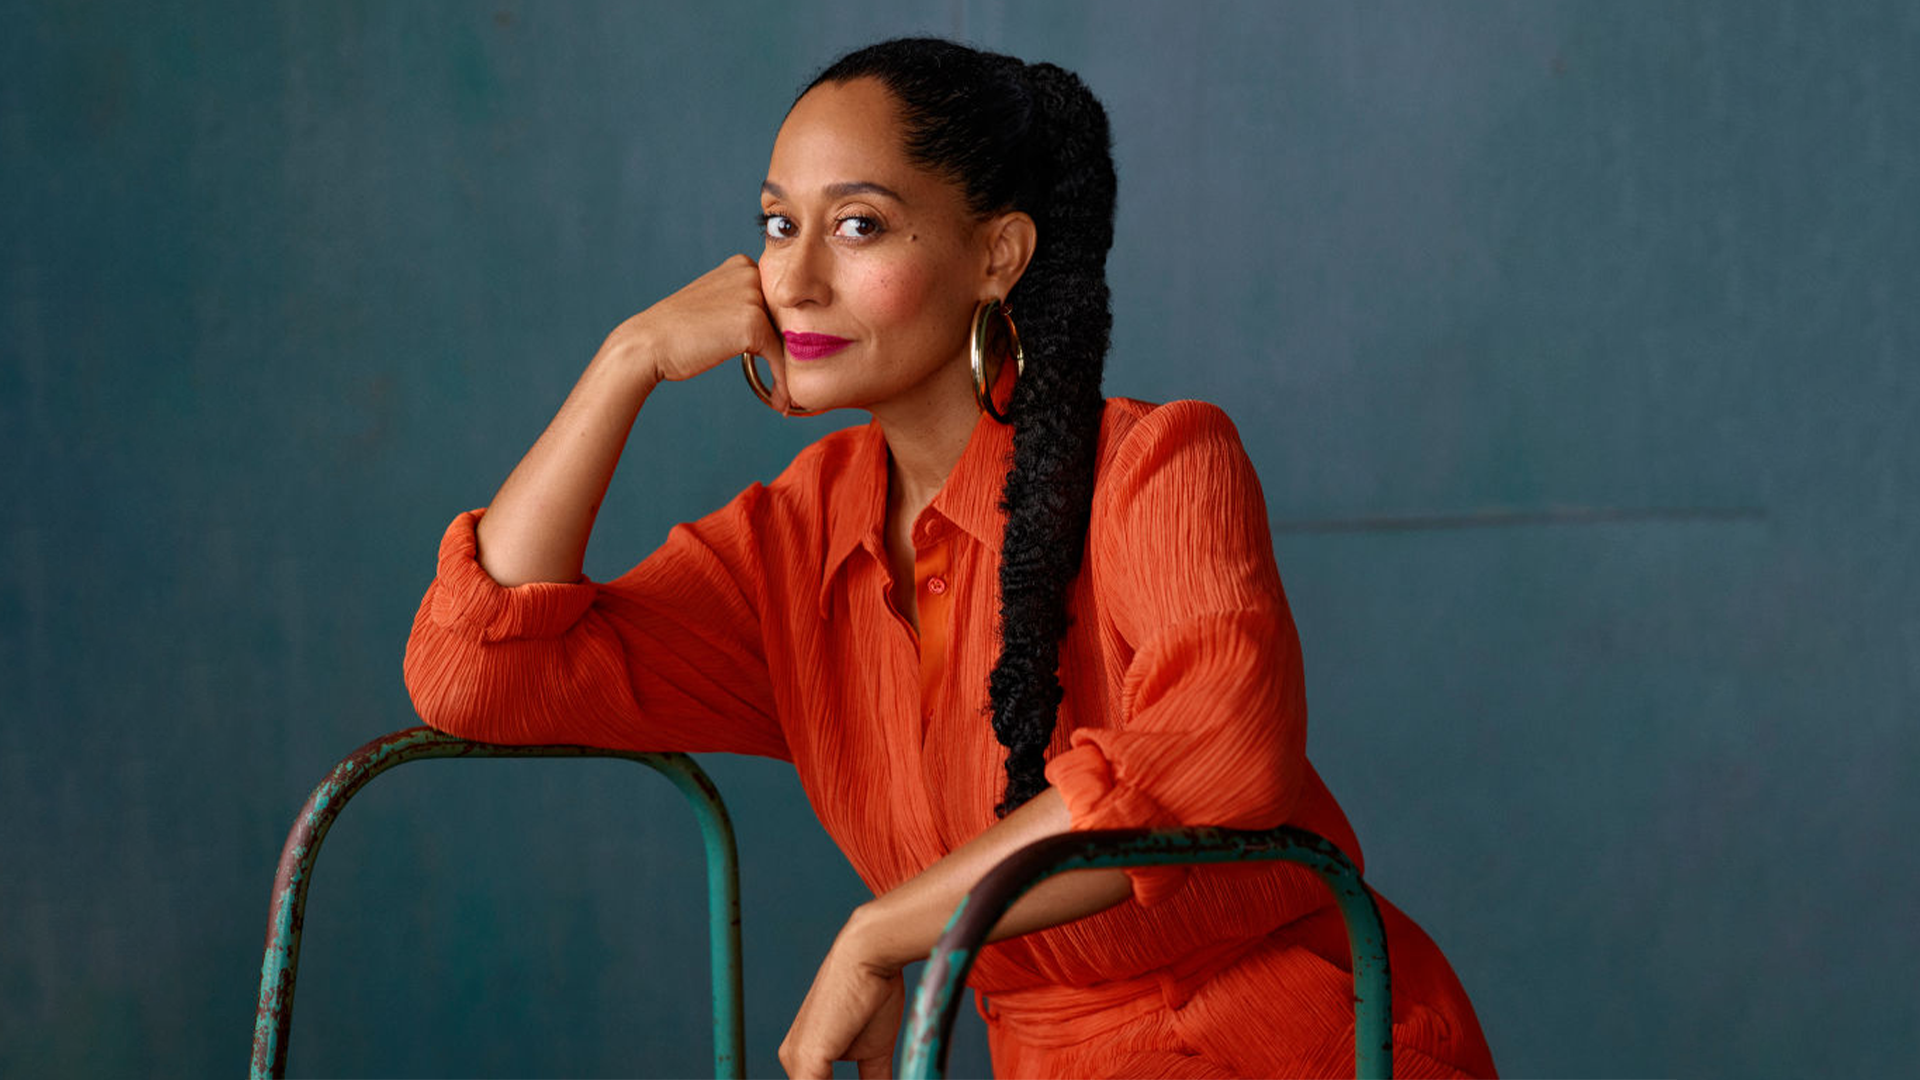 Buy From A Black Woman: Tracee Ellis Ross Joins H&M To Bring Attention To Black Female Entrepreneurs In An 'Authentic Way'